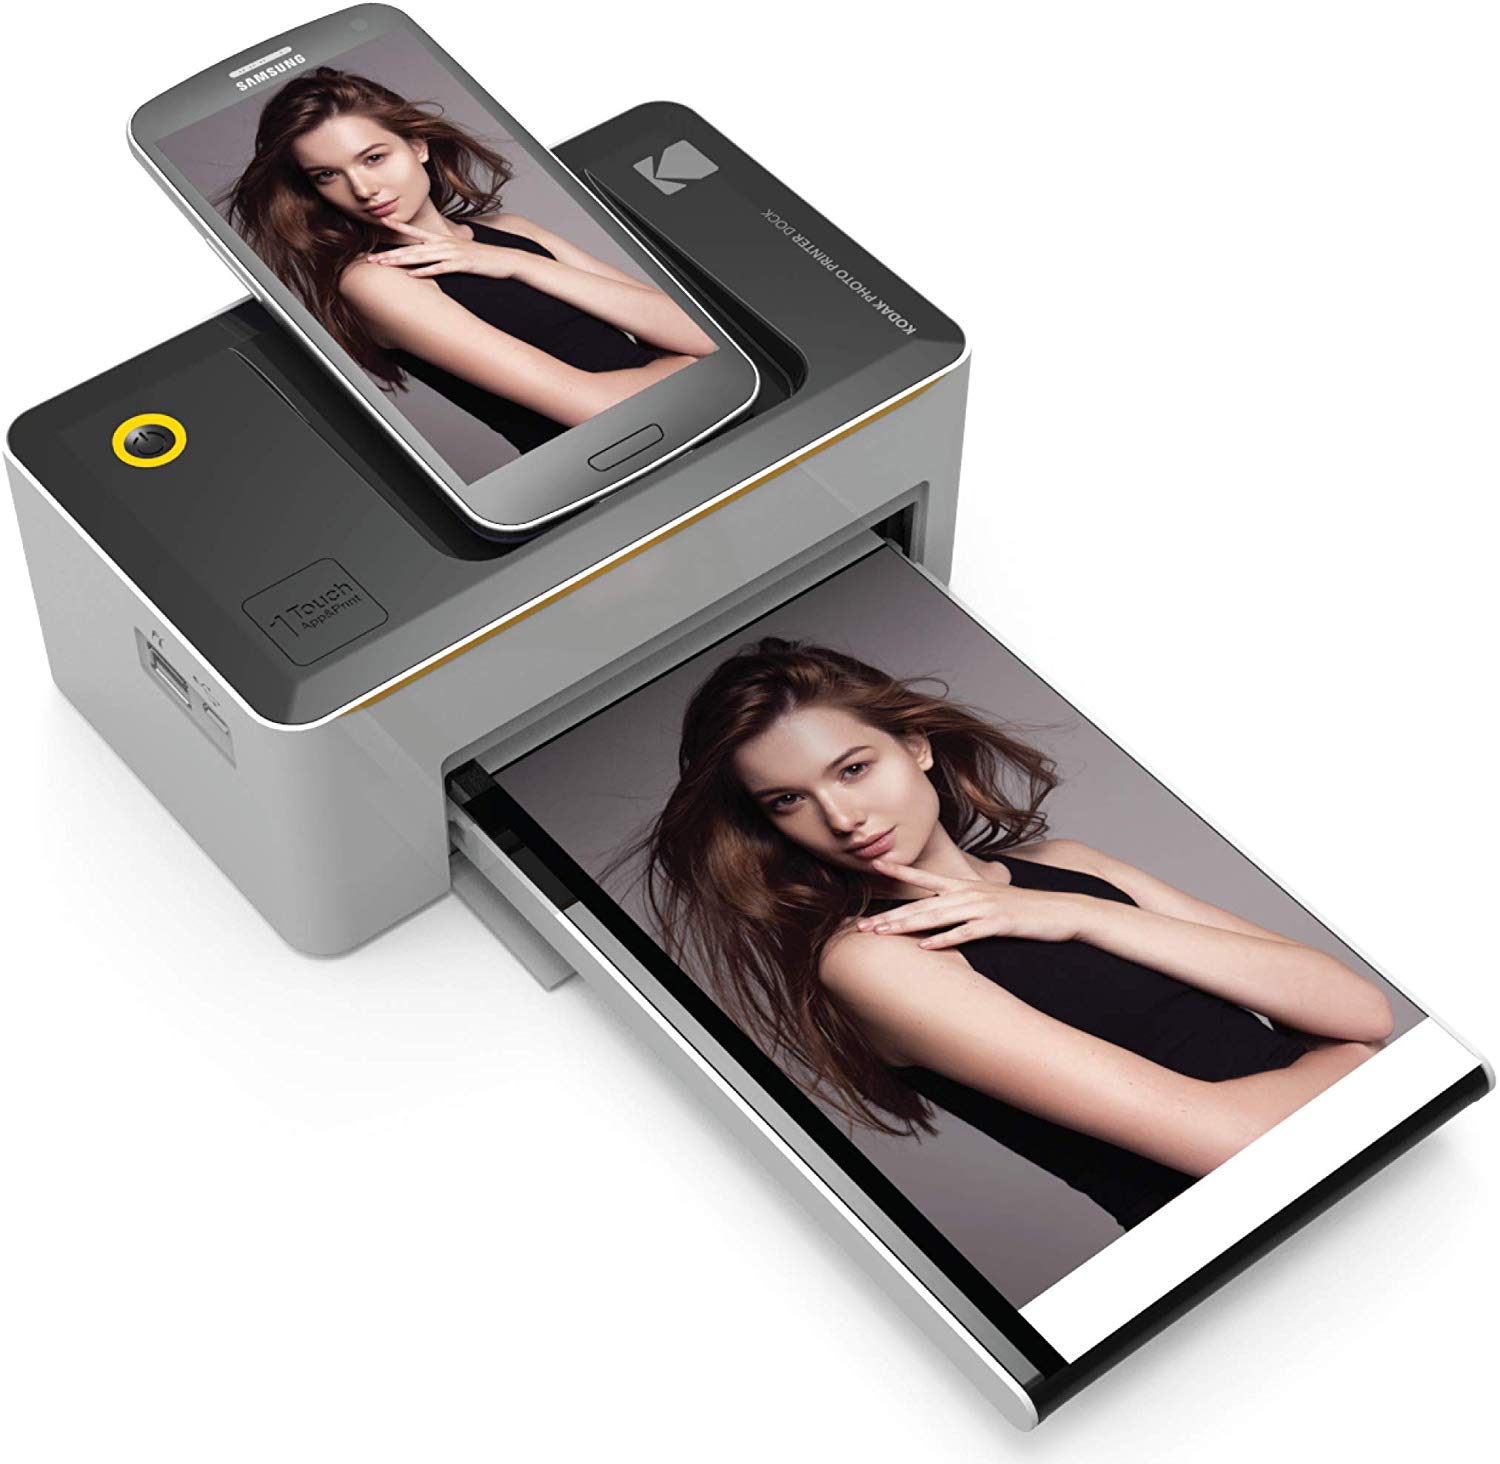 Kodak Dock & Wi-Fi Portable 4x6 Instant Photo Printer, Premium Quality Full Color Prints - Compatible w/iOS & Android Devices - image 1 of 11